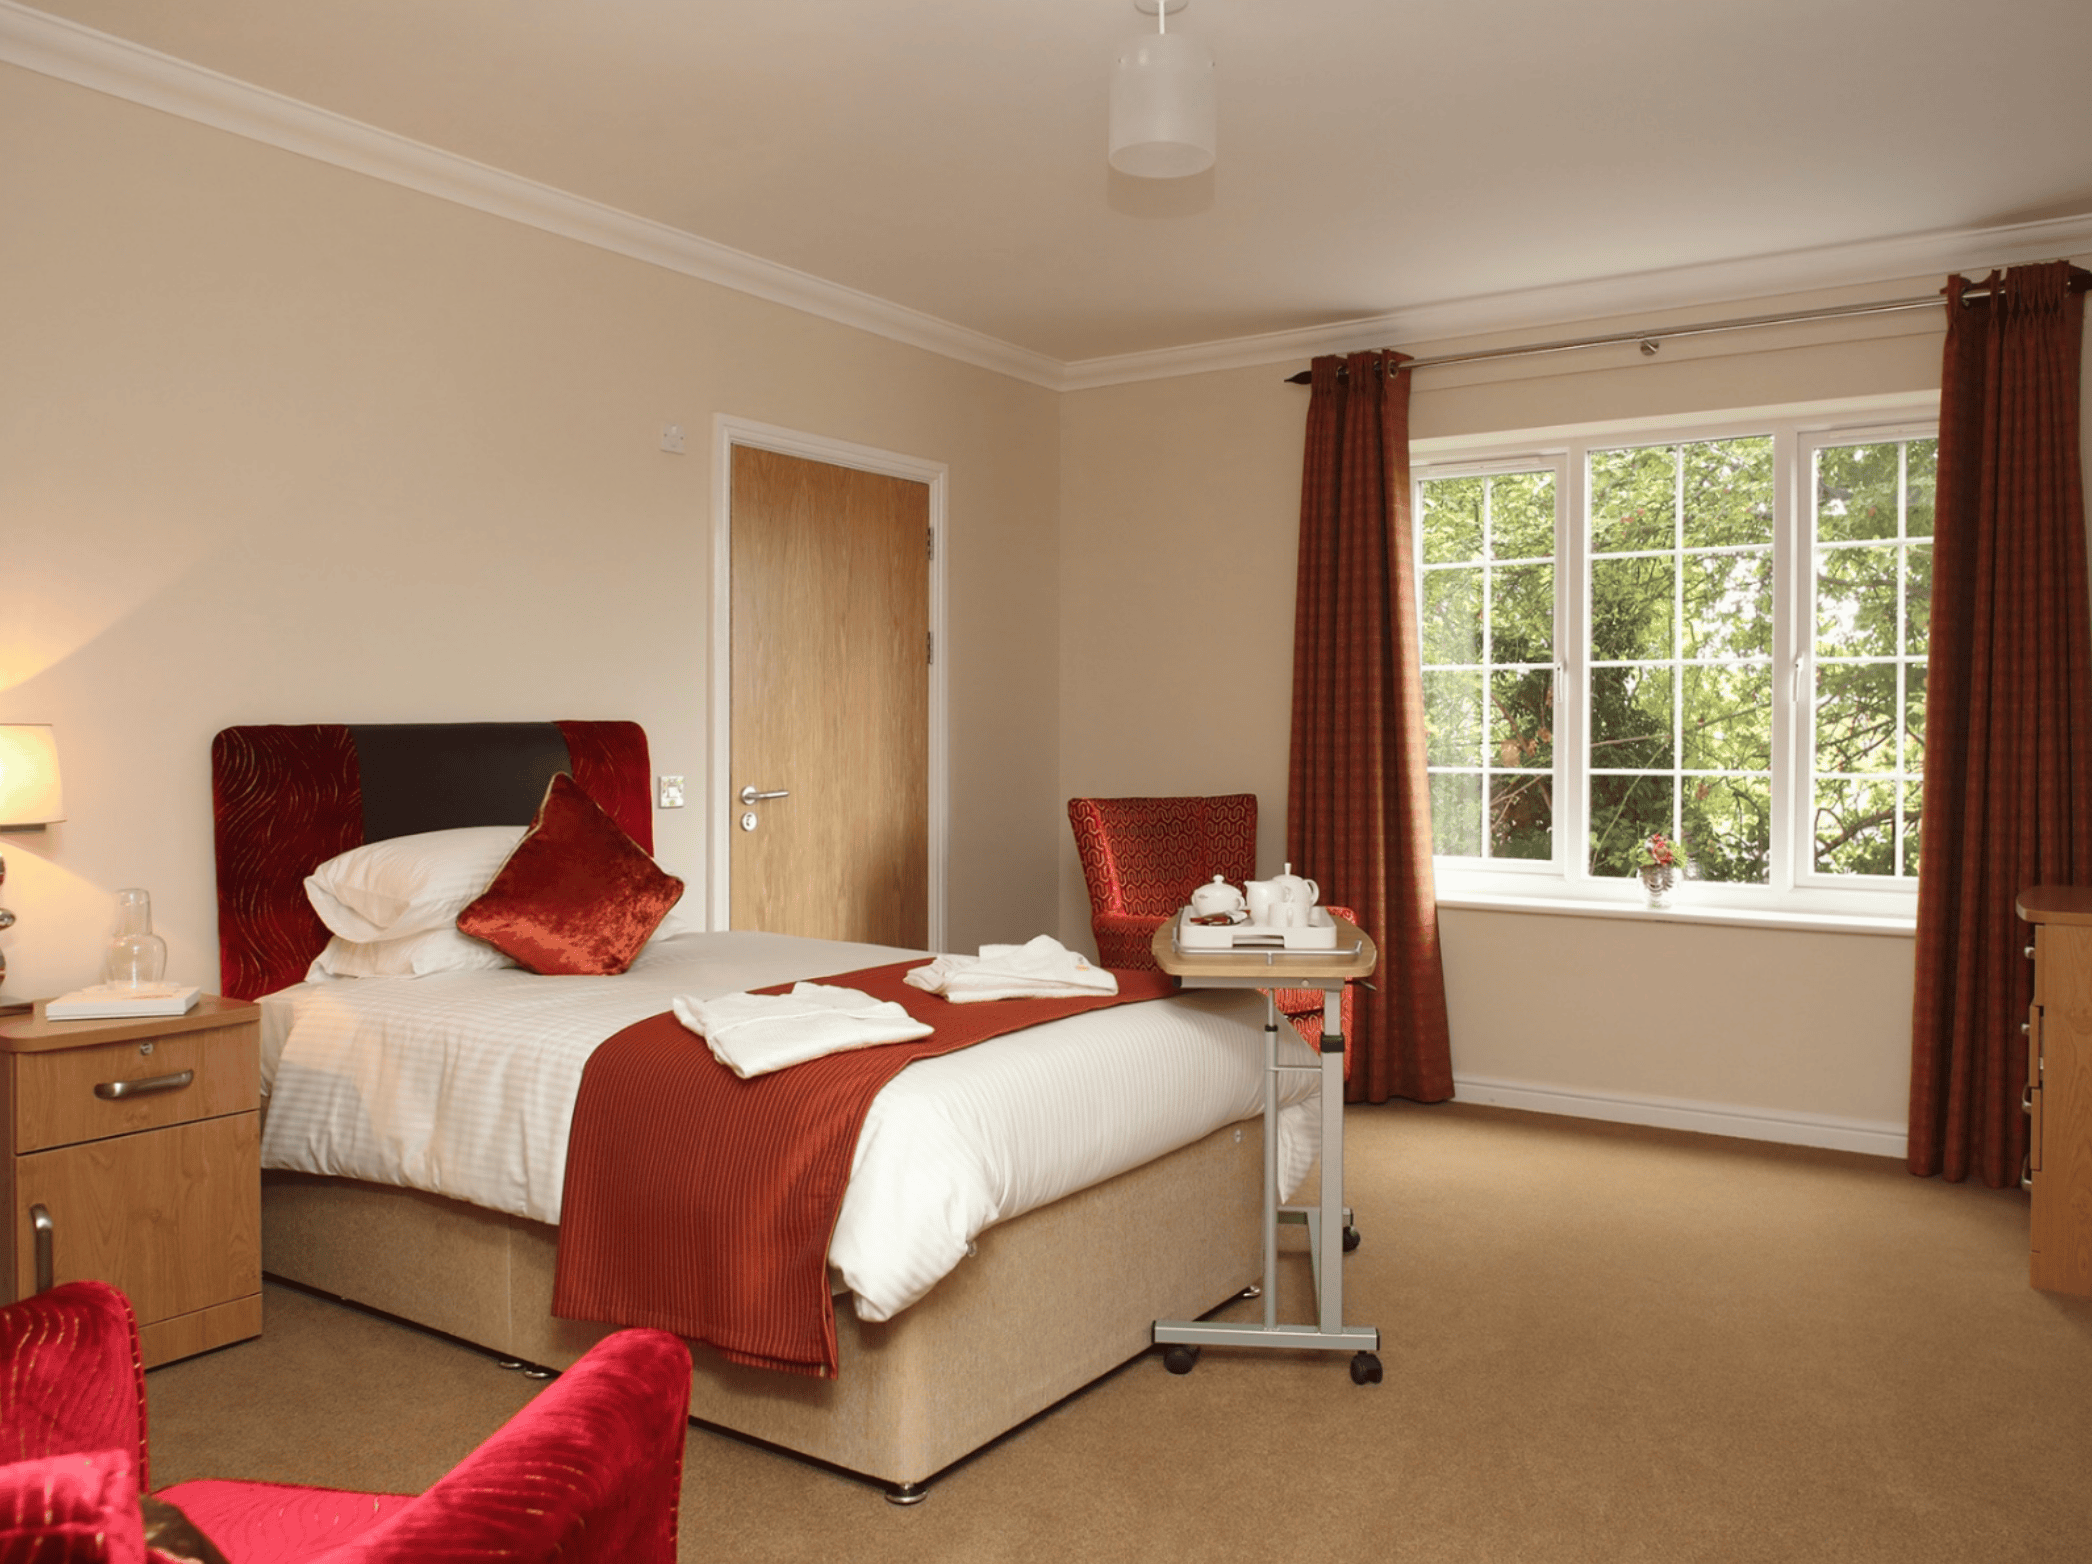 BEdroom of  Ryefield Court care home in Harrow, London